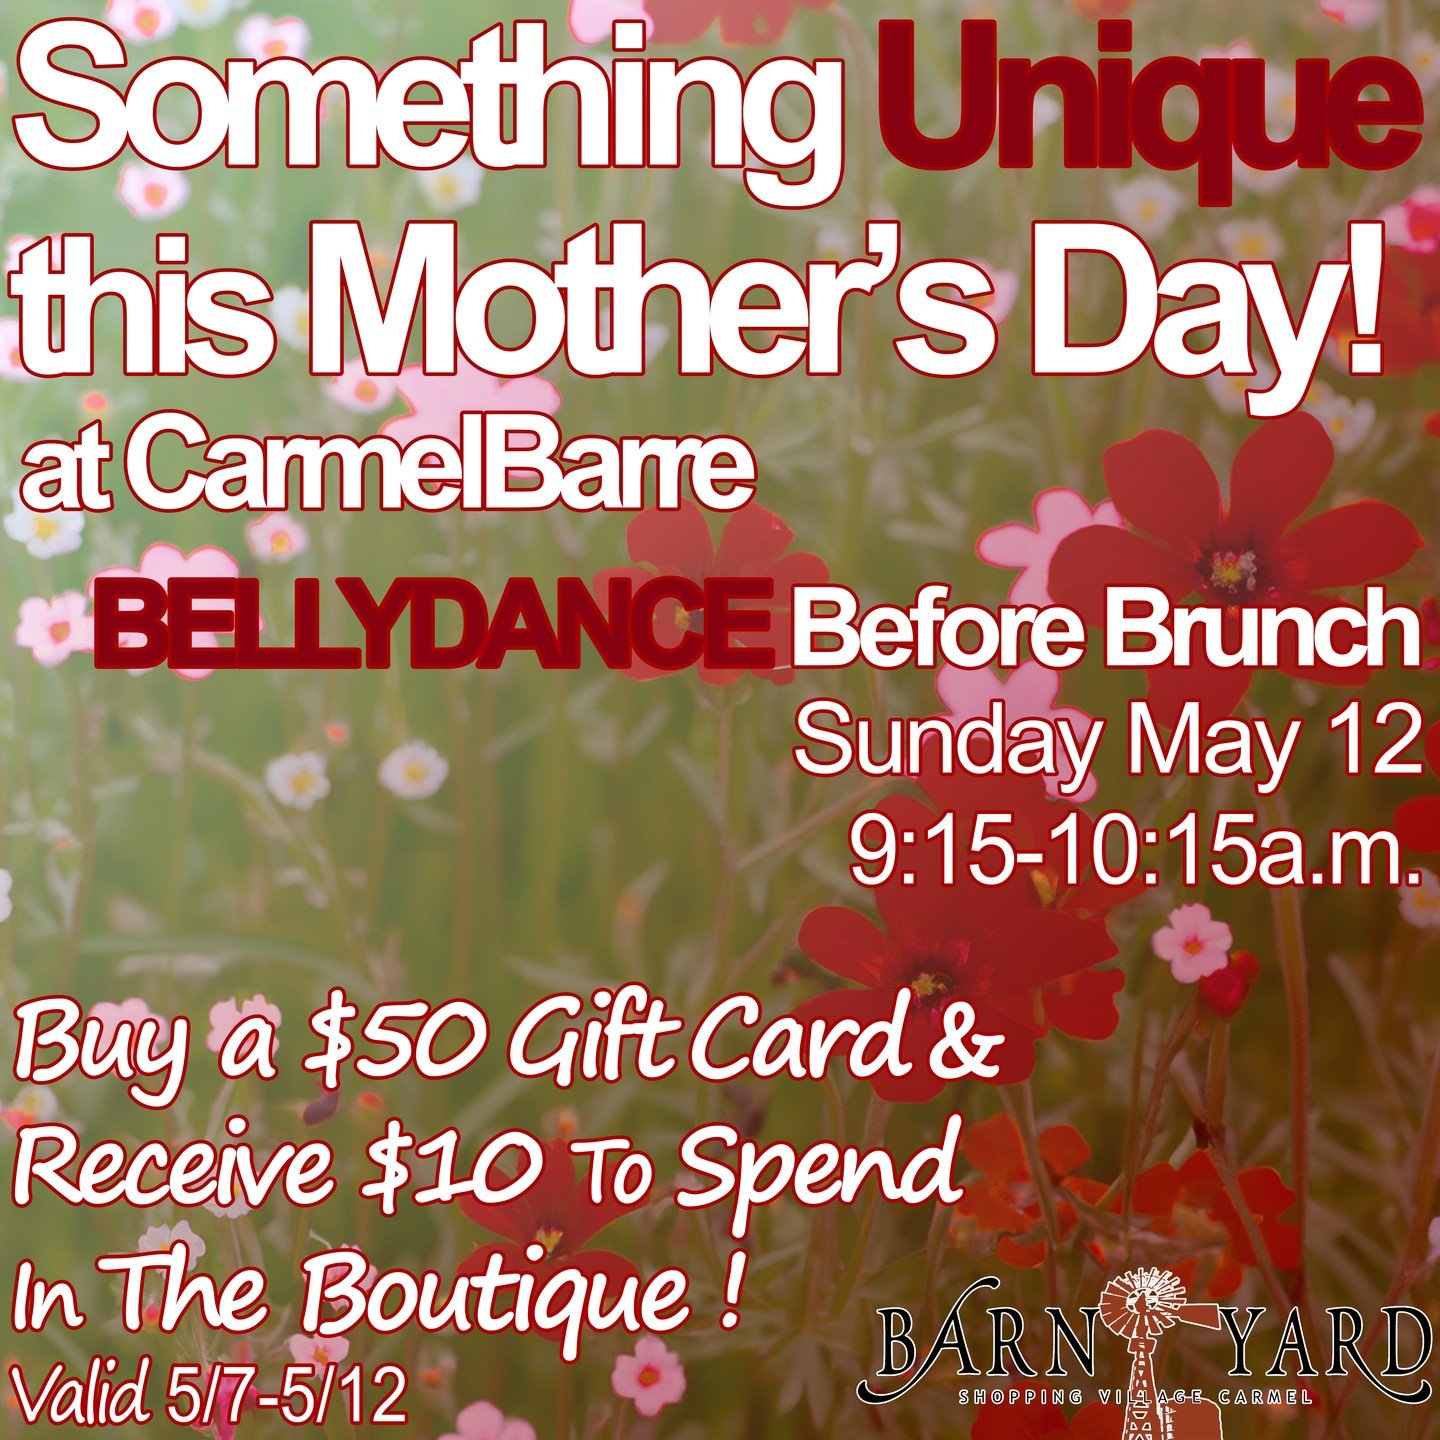 Enjoy something unique this Mother&rsquo;s Day @carmelbarre ! On Sunday May 12th from 9:15-10:15a.m. try Belly Dancing Before Brunch. PLUS, buy a $50 gift card and receive $10 to spend in the boutique. 

#carmel
#carmelcalifornia
#carmelca
#thebarnya